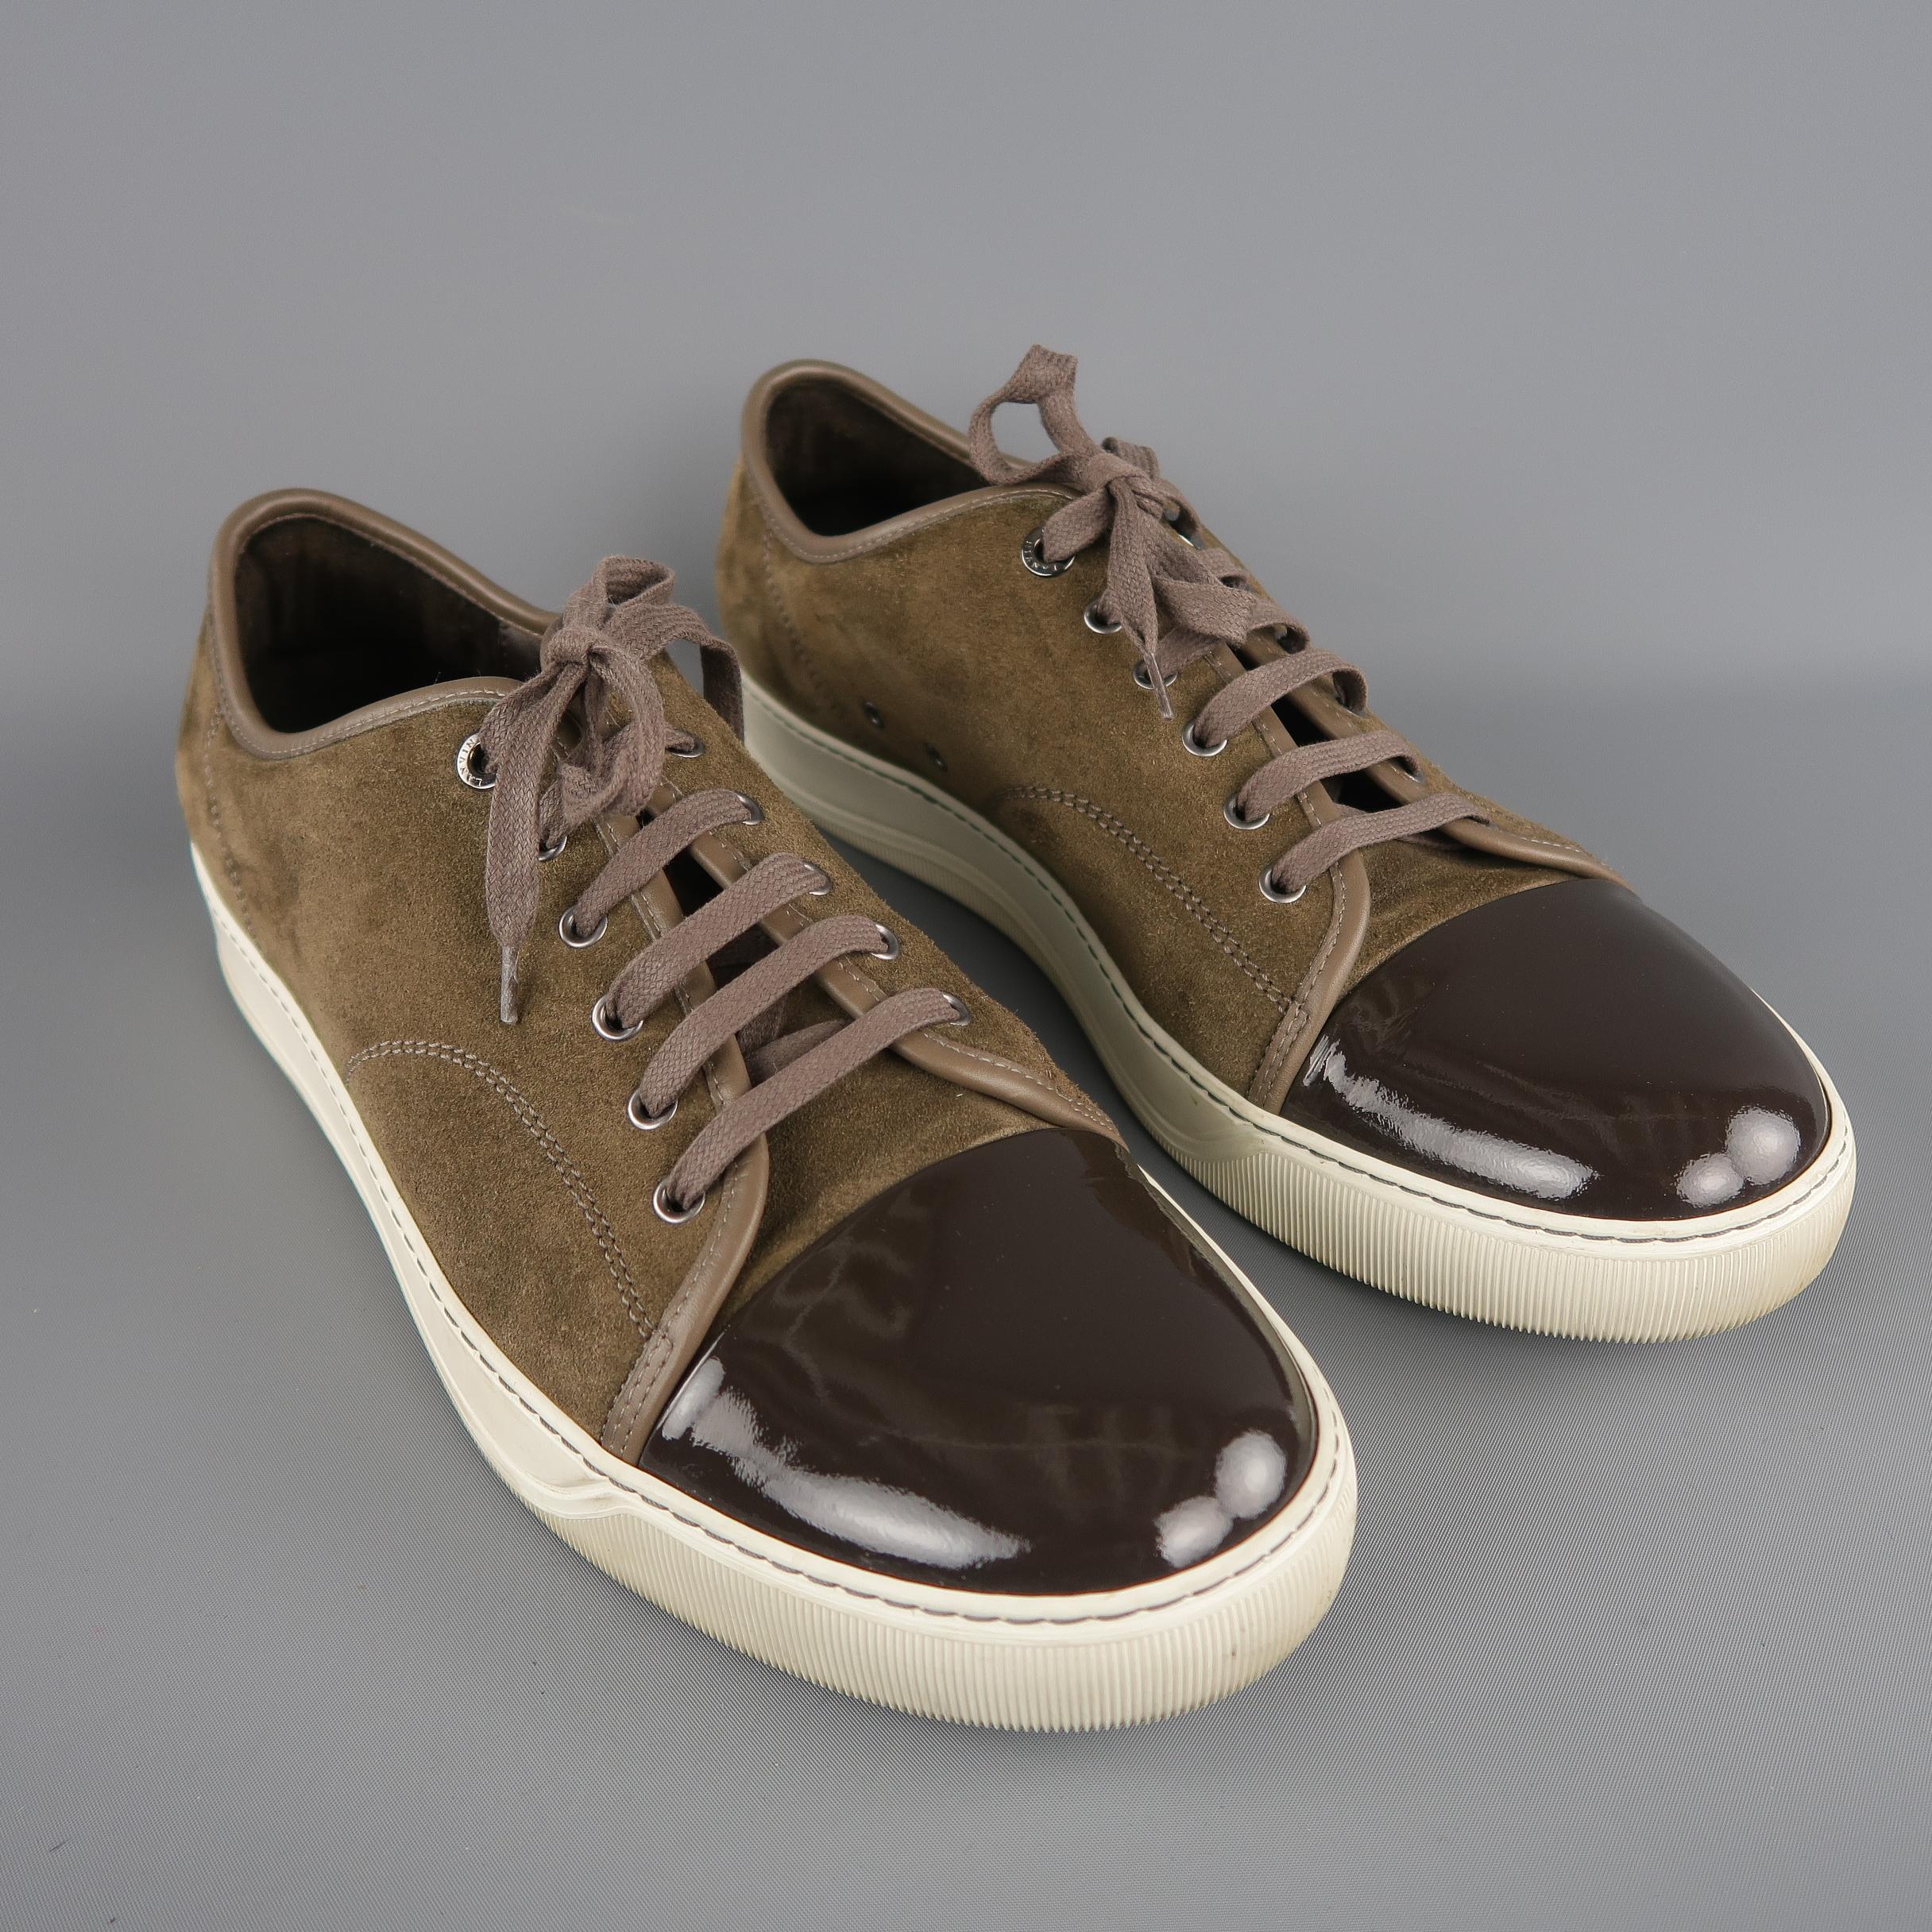 LANVIN soft taupe suede low-top sneakers are styled with a patent leather cap toe. As-Is. Made in Portugal.
 
Very good Pre-Owned Condition.
Marked: Lanvin UK 12
 
Outsole: 13 x 3 in.  